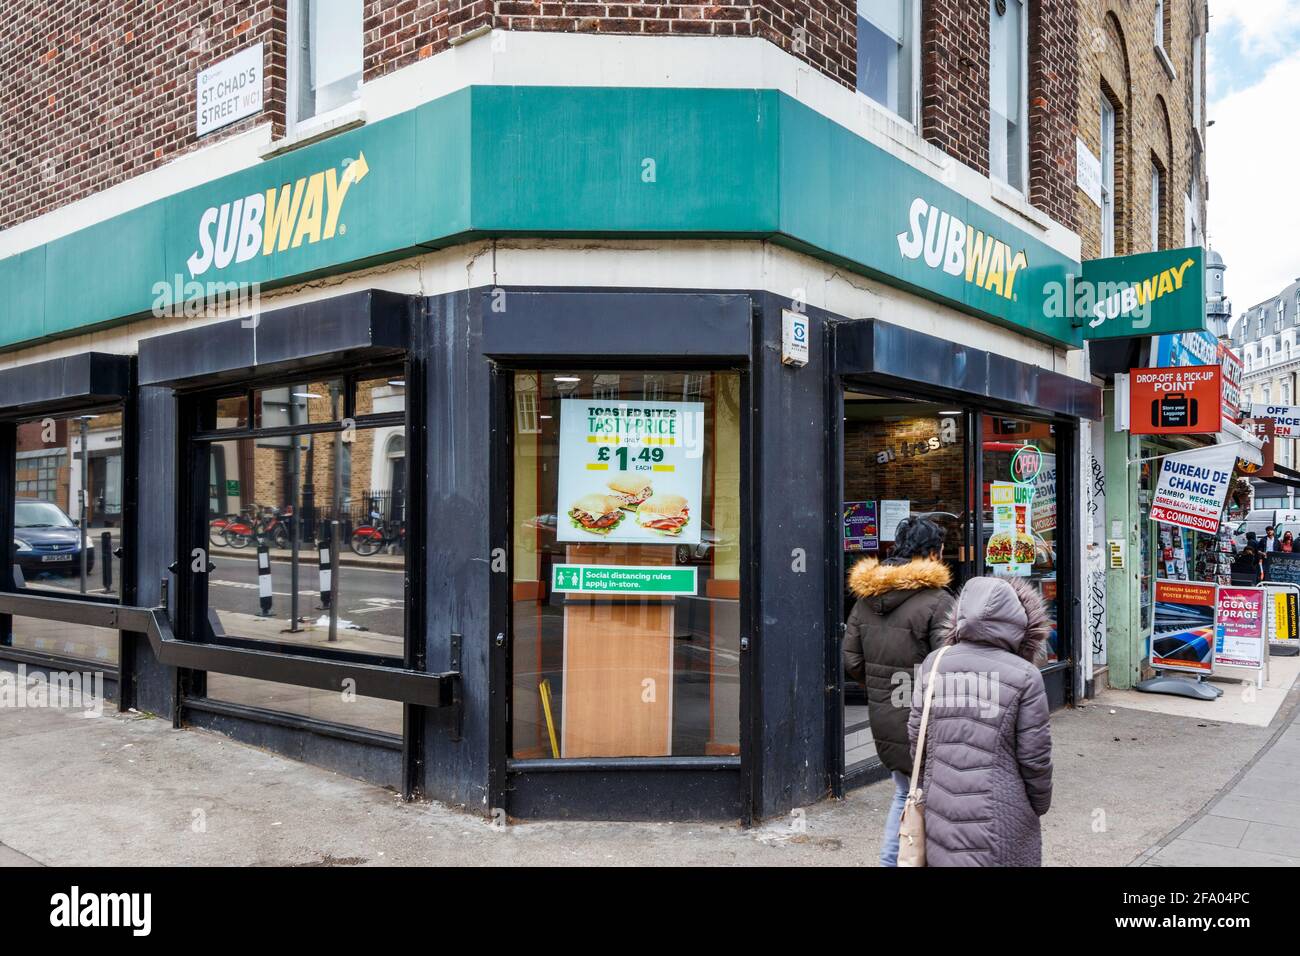 A branch of Subway fast food outlet on Grays Inn Road, King's Cross, London, UK Stock Photo